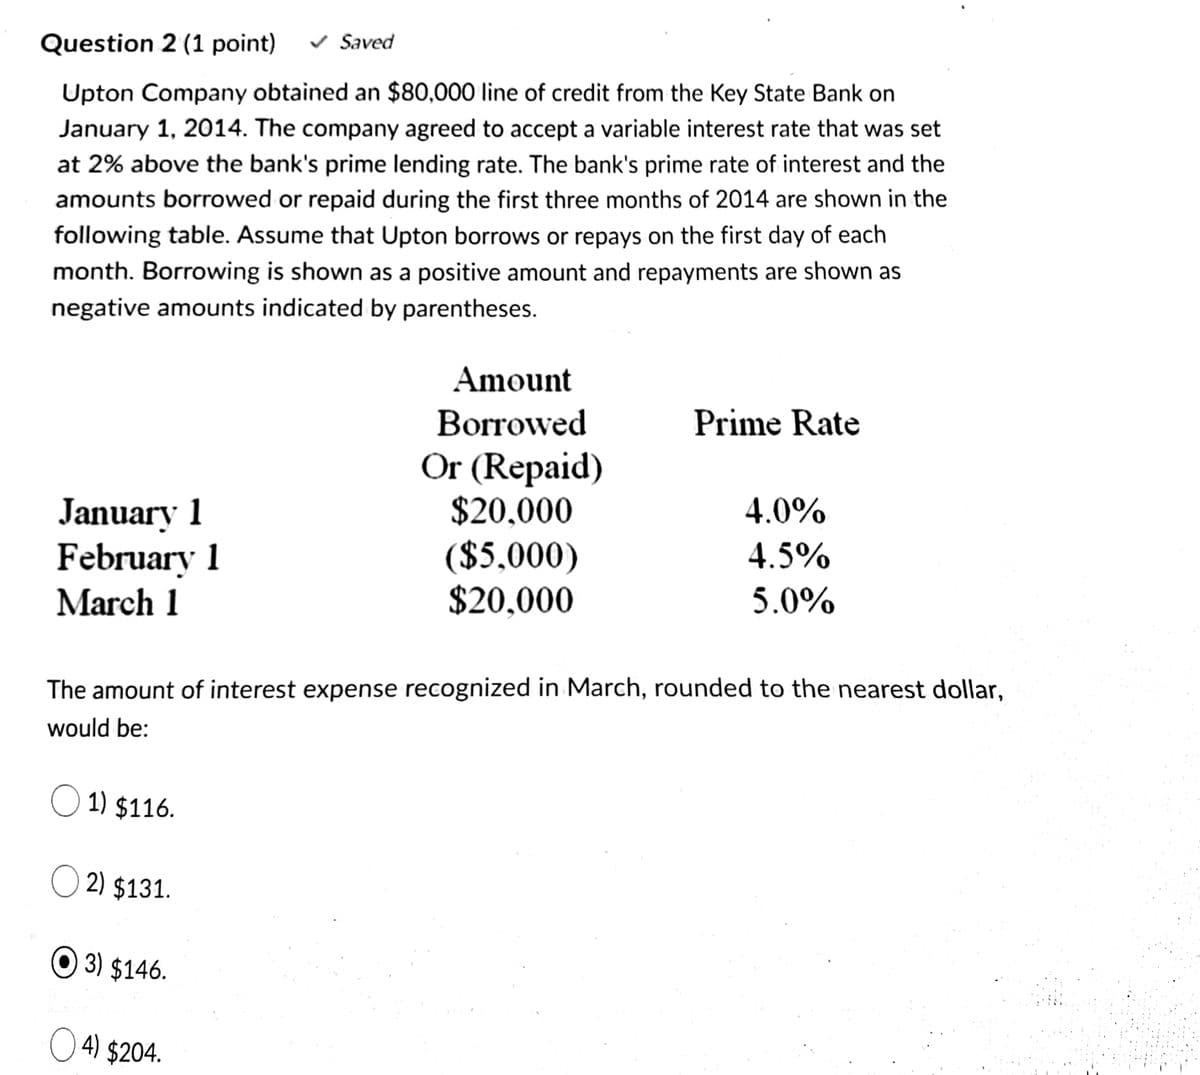 Question 2 (1 point)
v Saved
Upton Company obtained an $80,000 line of credit from the Key State Bank on
January 1, 2014. The company agreed to accept a variable interest rate that was set
at 2% above the bank's prime lending rate. The bank's prime rate of interest and the
amounts borrowed or repaid during the first three months of 2014 are shown in the
following table. Assume that Upton borrows or repays on the first day of each
month. Borrowing is shown as a positive amount and repayments are shown as
negative amounts indicated by parentheses.
Amount
Borrowed
Prime Rate
Or (Repaid)
January 1
February 1
$20,000
4.0%
($5,000)
$20,000
4.5%
March 1
5.0%
The amount of interest expense recognized in March, rounded to the nearest dollar,
would be:
O 1) $116.
O 2) $131.
O 3) $146.
O 4) $204.
